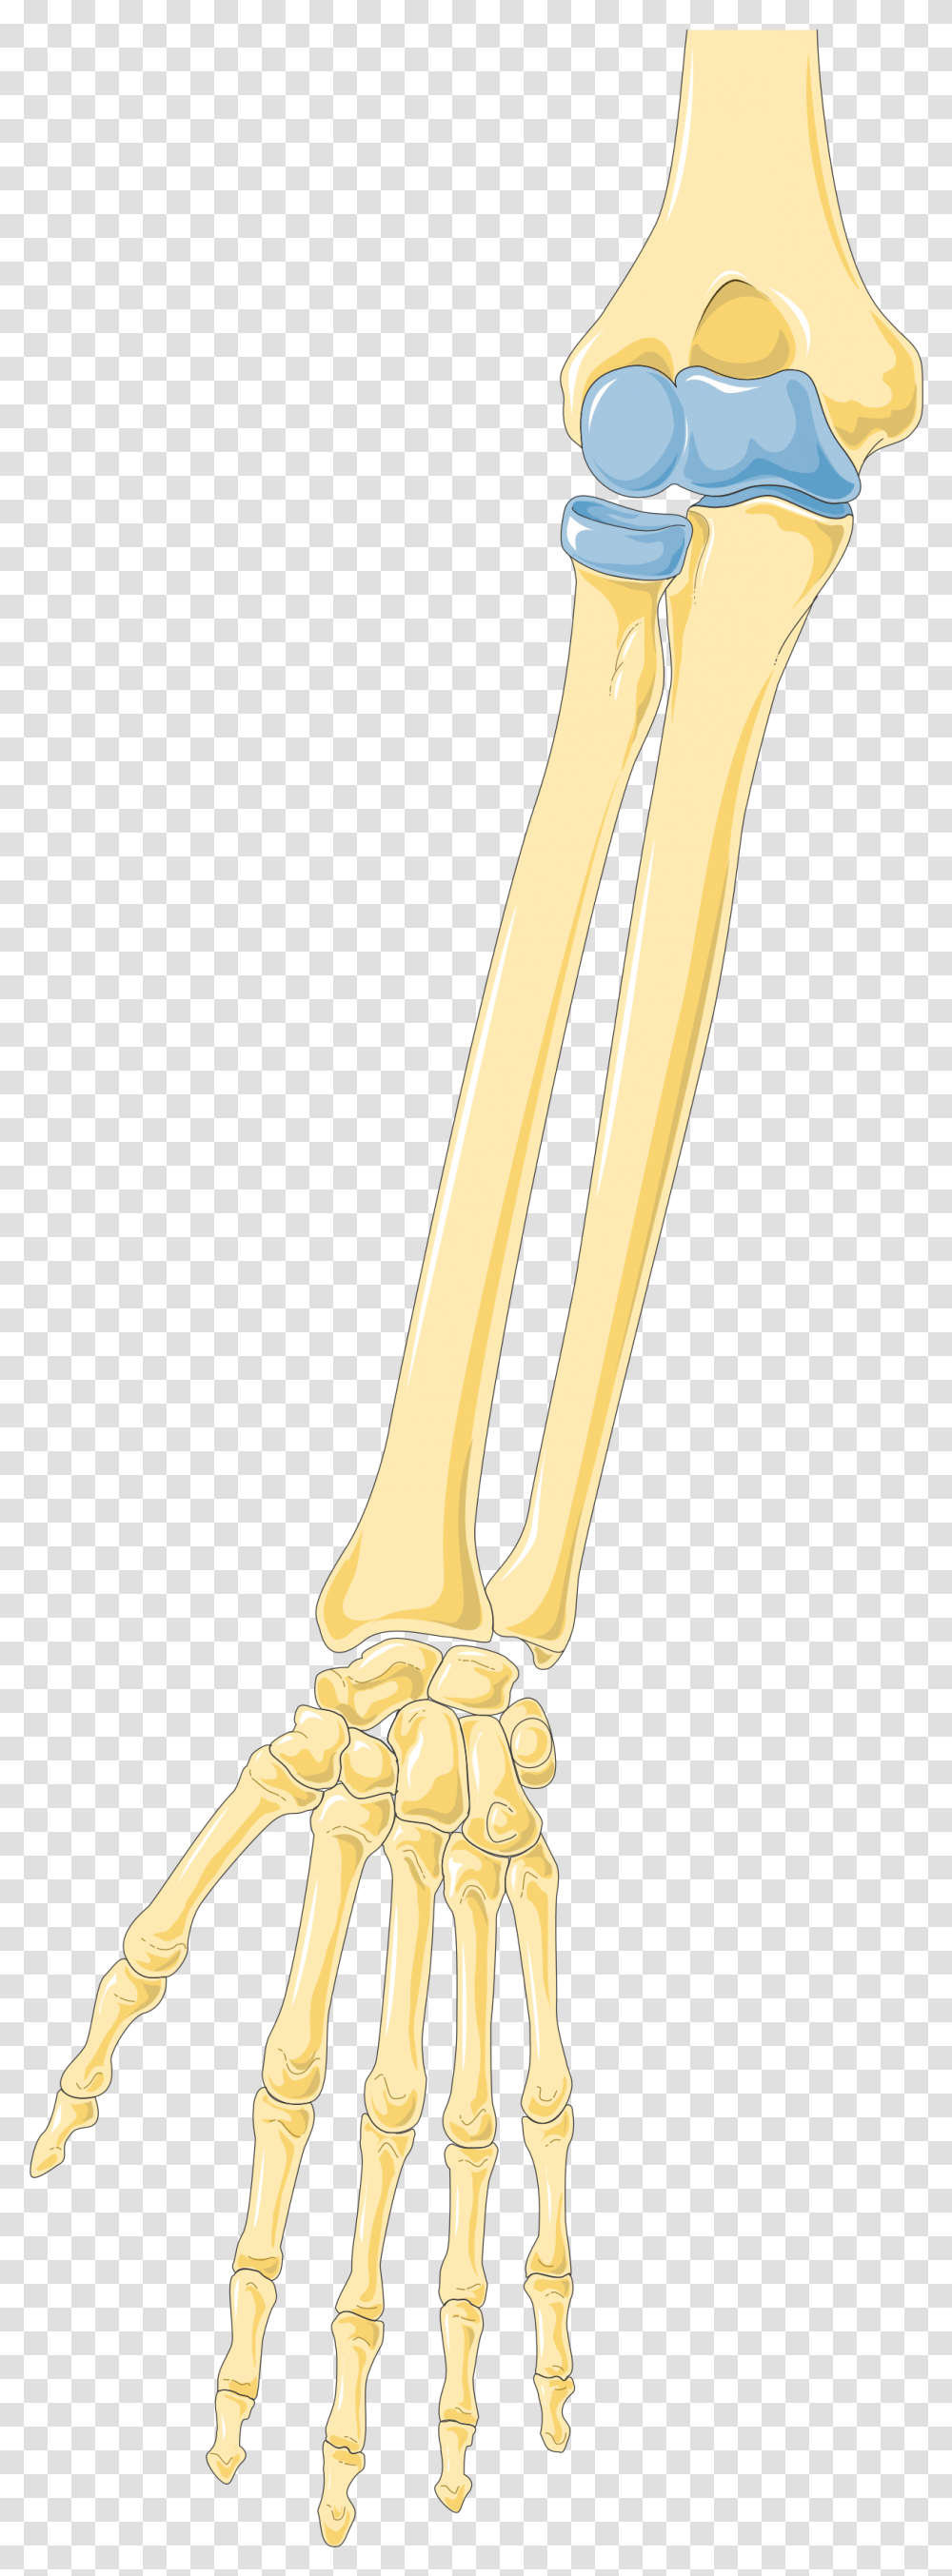 Arm 2 Long, Brass Section, Musical Instrument, Horn, Cutlery Transparent Png